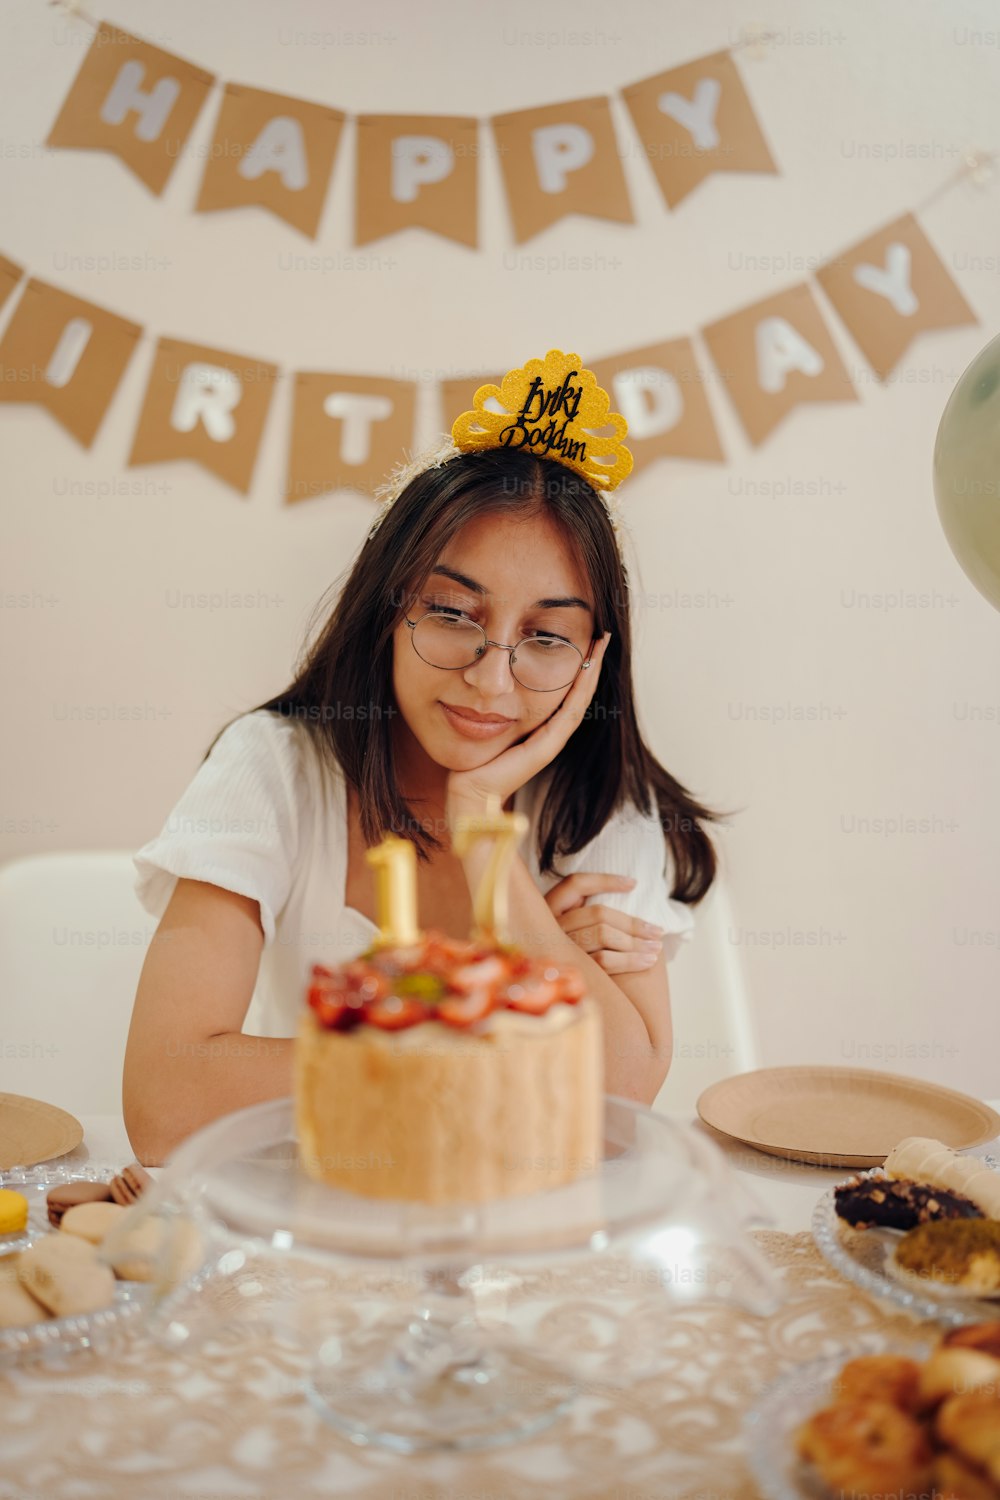 a girl sitting at a table with a birthday cake